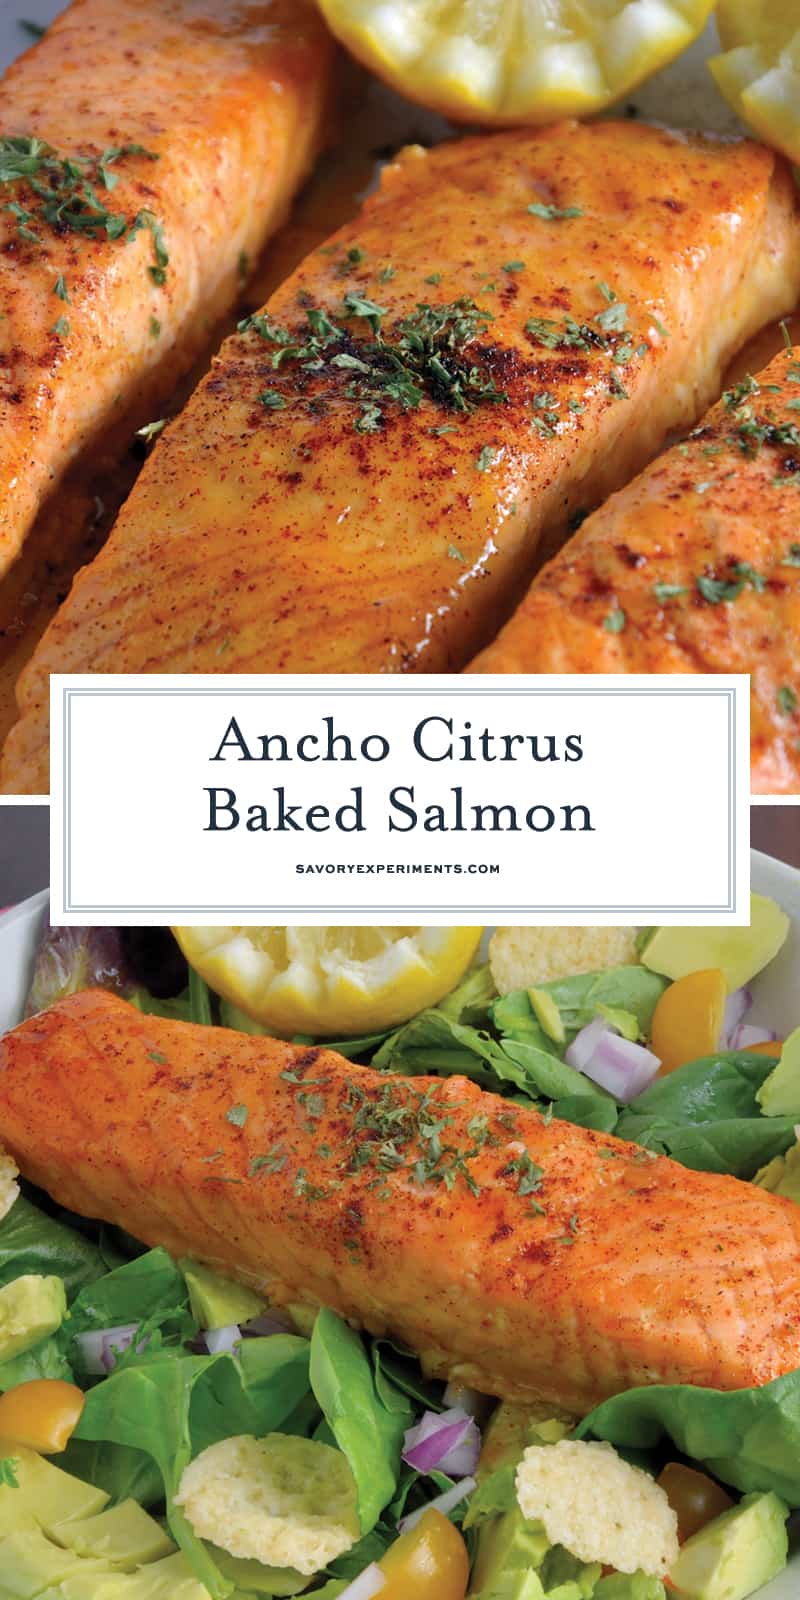 Ancho Citrus Baked Salmon is a simple, easy, low fat, vitamin packed, deliciously tasty recipe! This ancho citrus marinade is an ideal sauce to use for salmon! #easysalmonrecipes #salmonmarinade #sauceforsalmon www.savoryexperiments.com